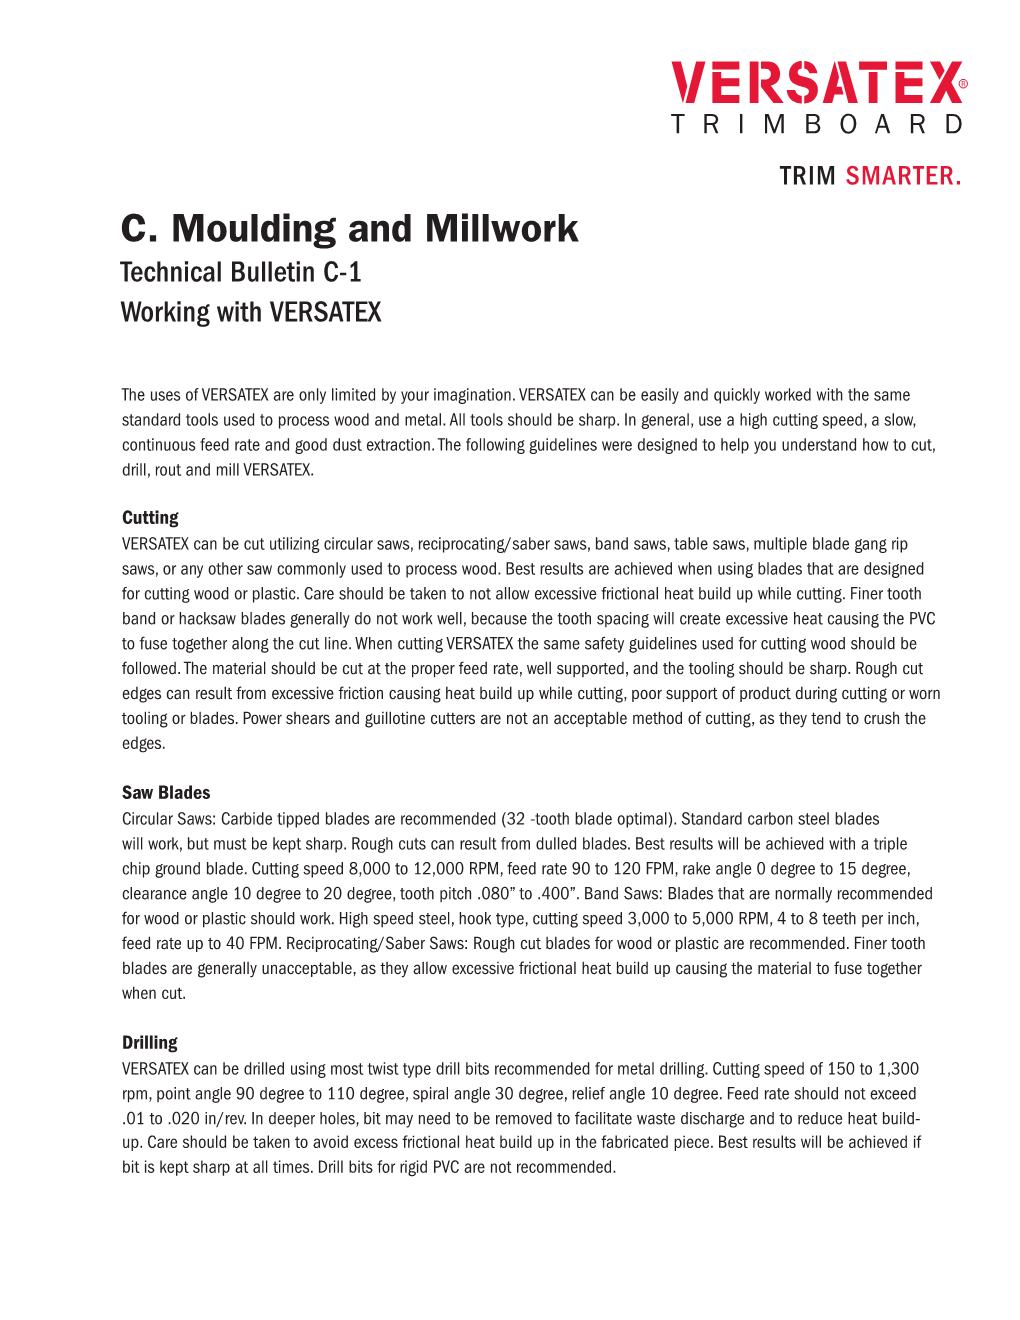 C. Moulding and Millwork Technical Bulletin C-1 Working with VERSATEX